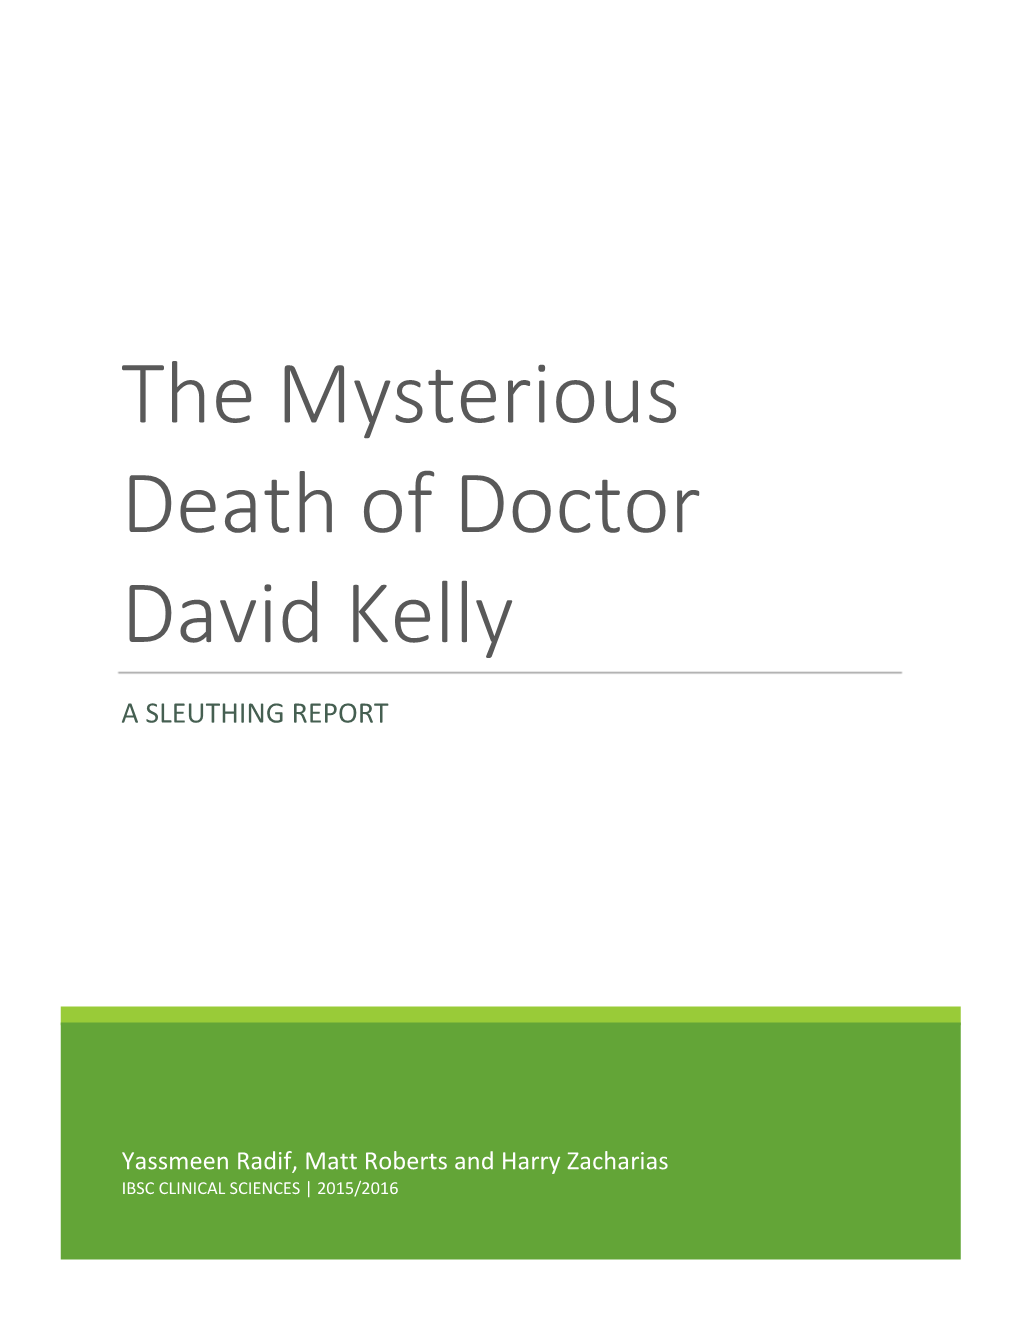 The Mysterious Death of Doctor David Kelly